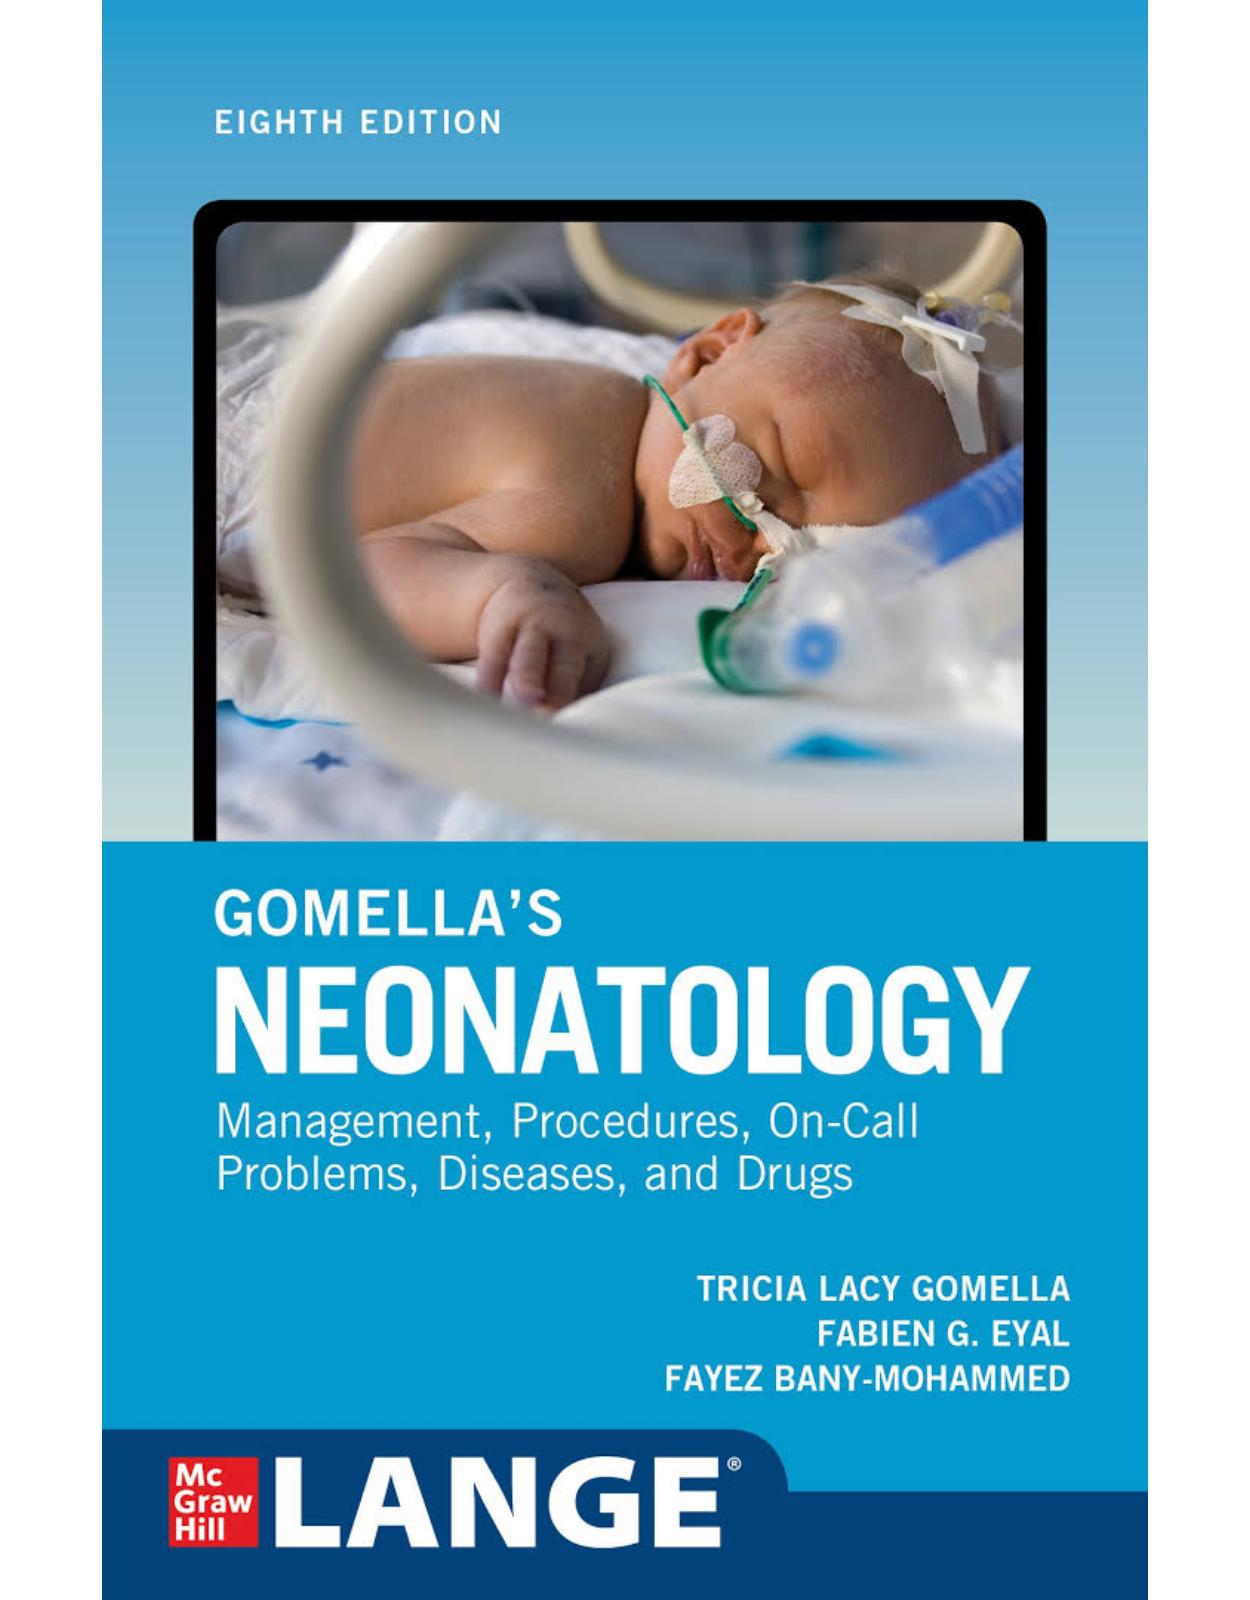 Gomella's Neonatology. Management, Procedures, On-call Problems, Diseases and Drugs, Eighth Edition